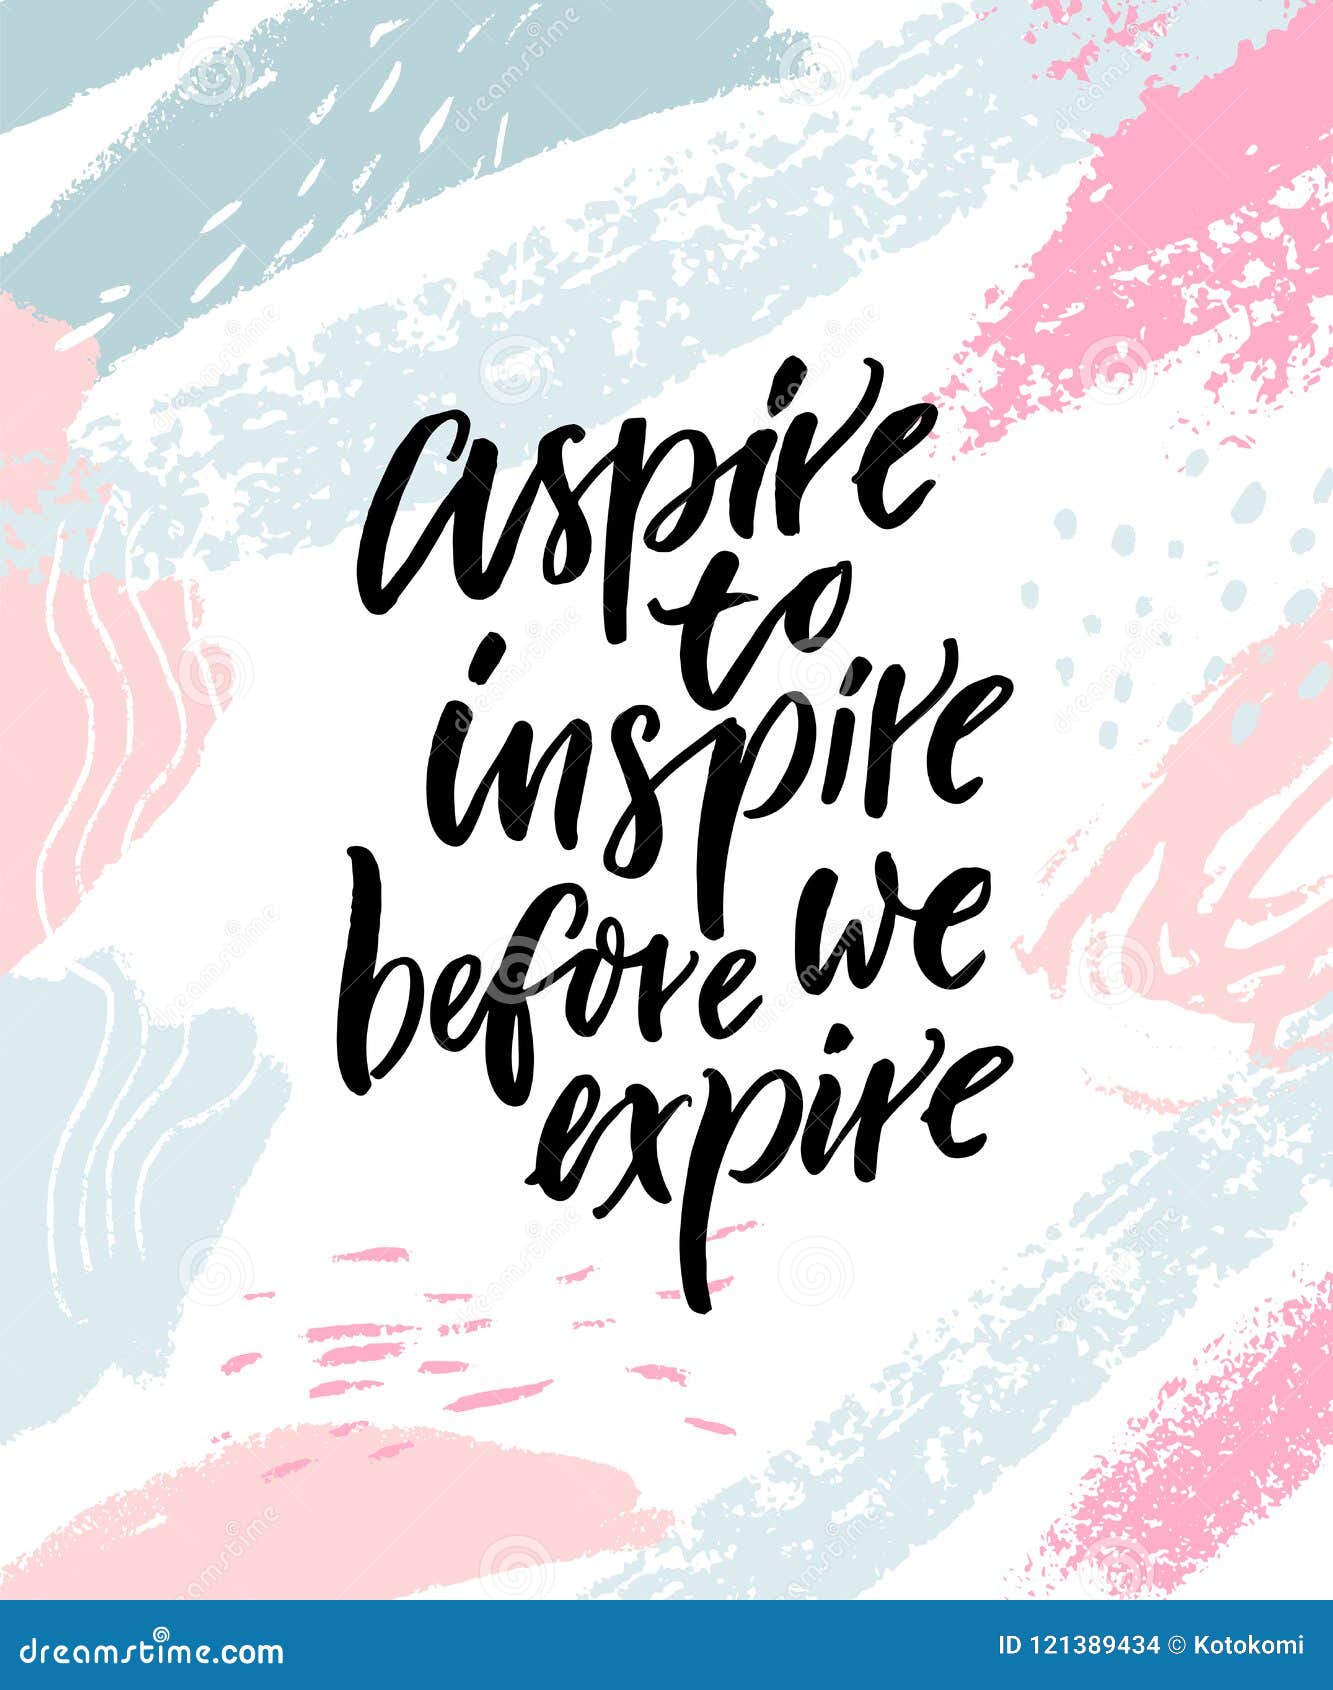 aspire to inspire before we expire. inspirational quote poster on abstract pastel pink and blue brush strokes